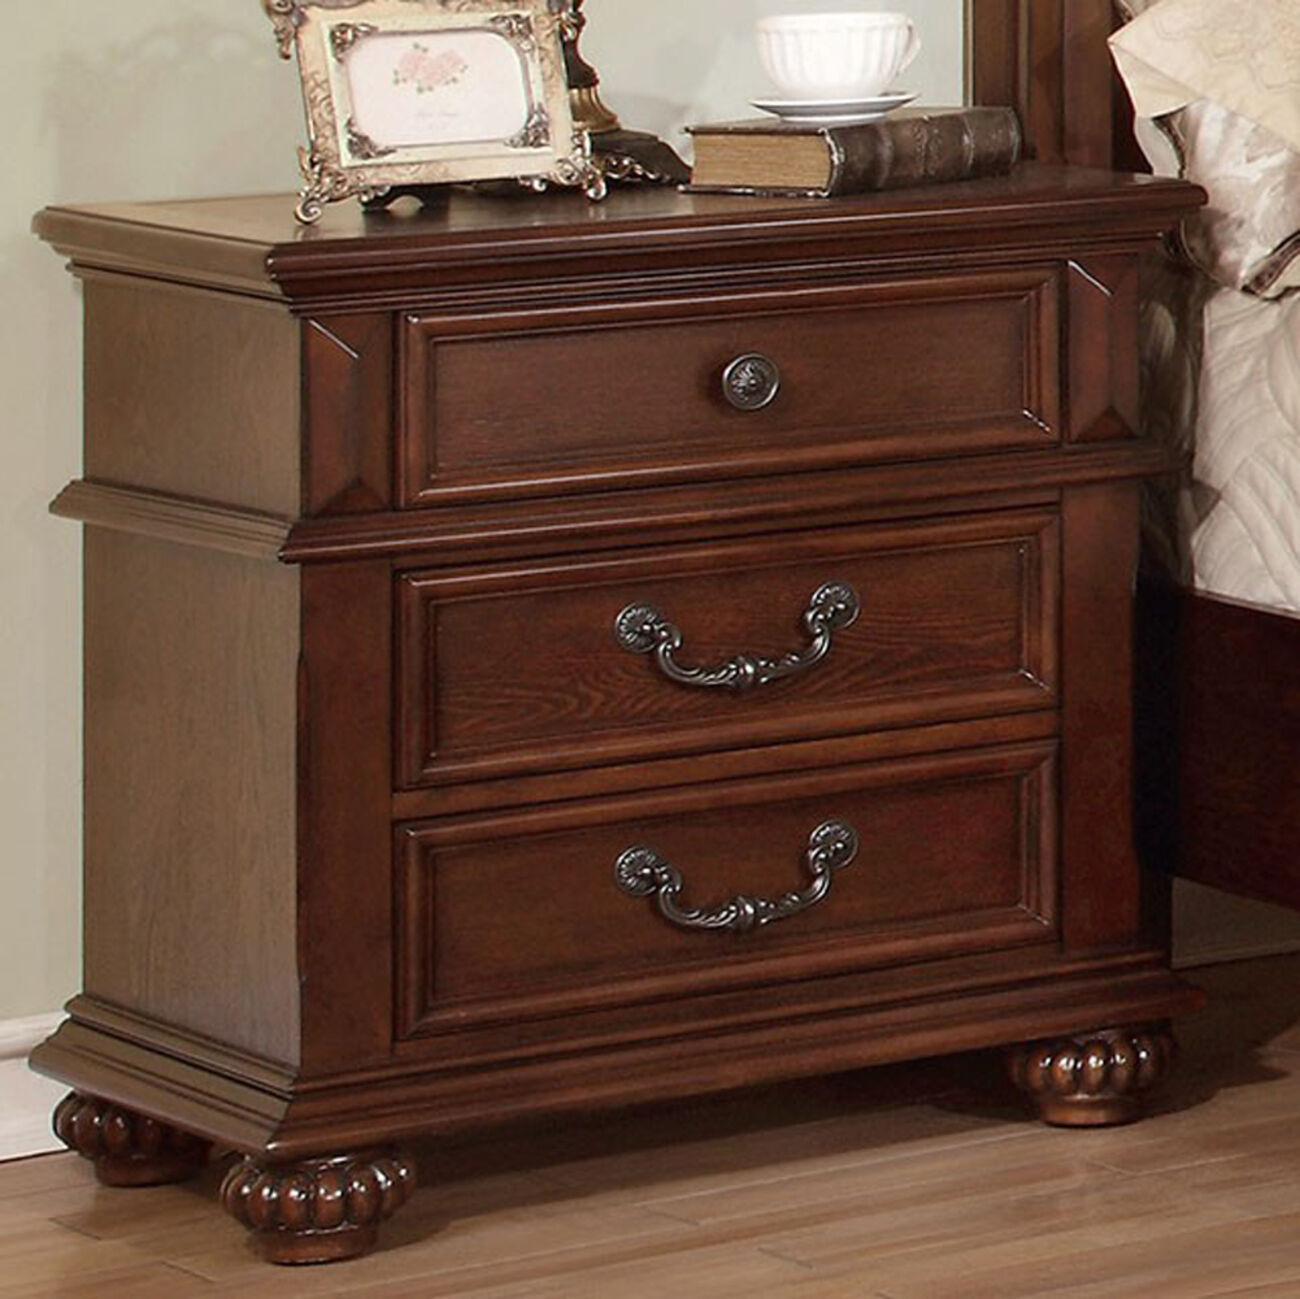 Landaluce Traditional Night Stand In Oak Finish